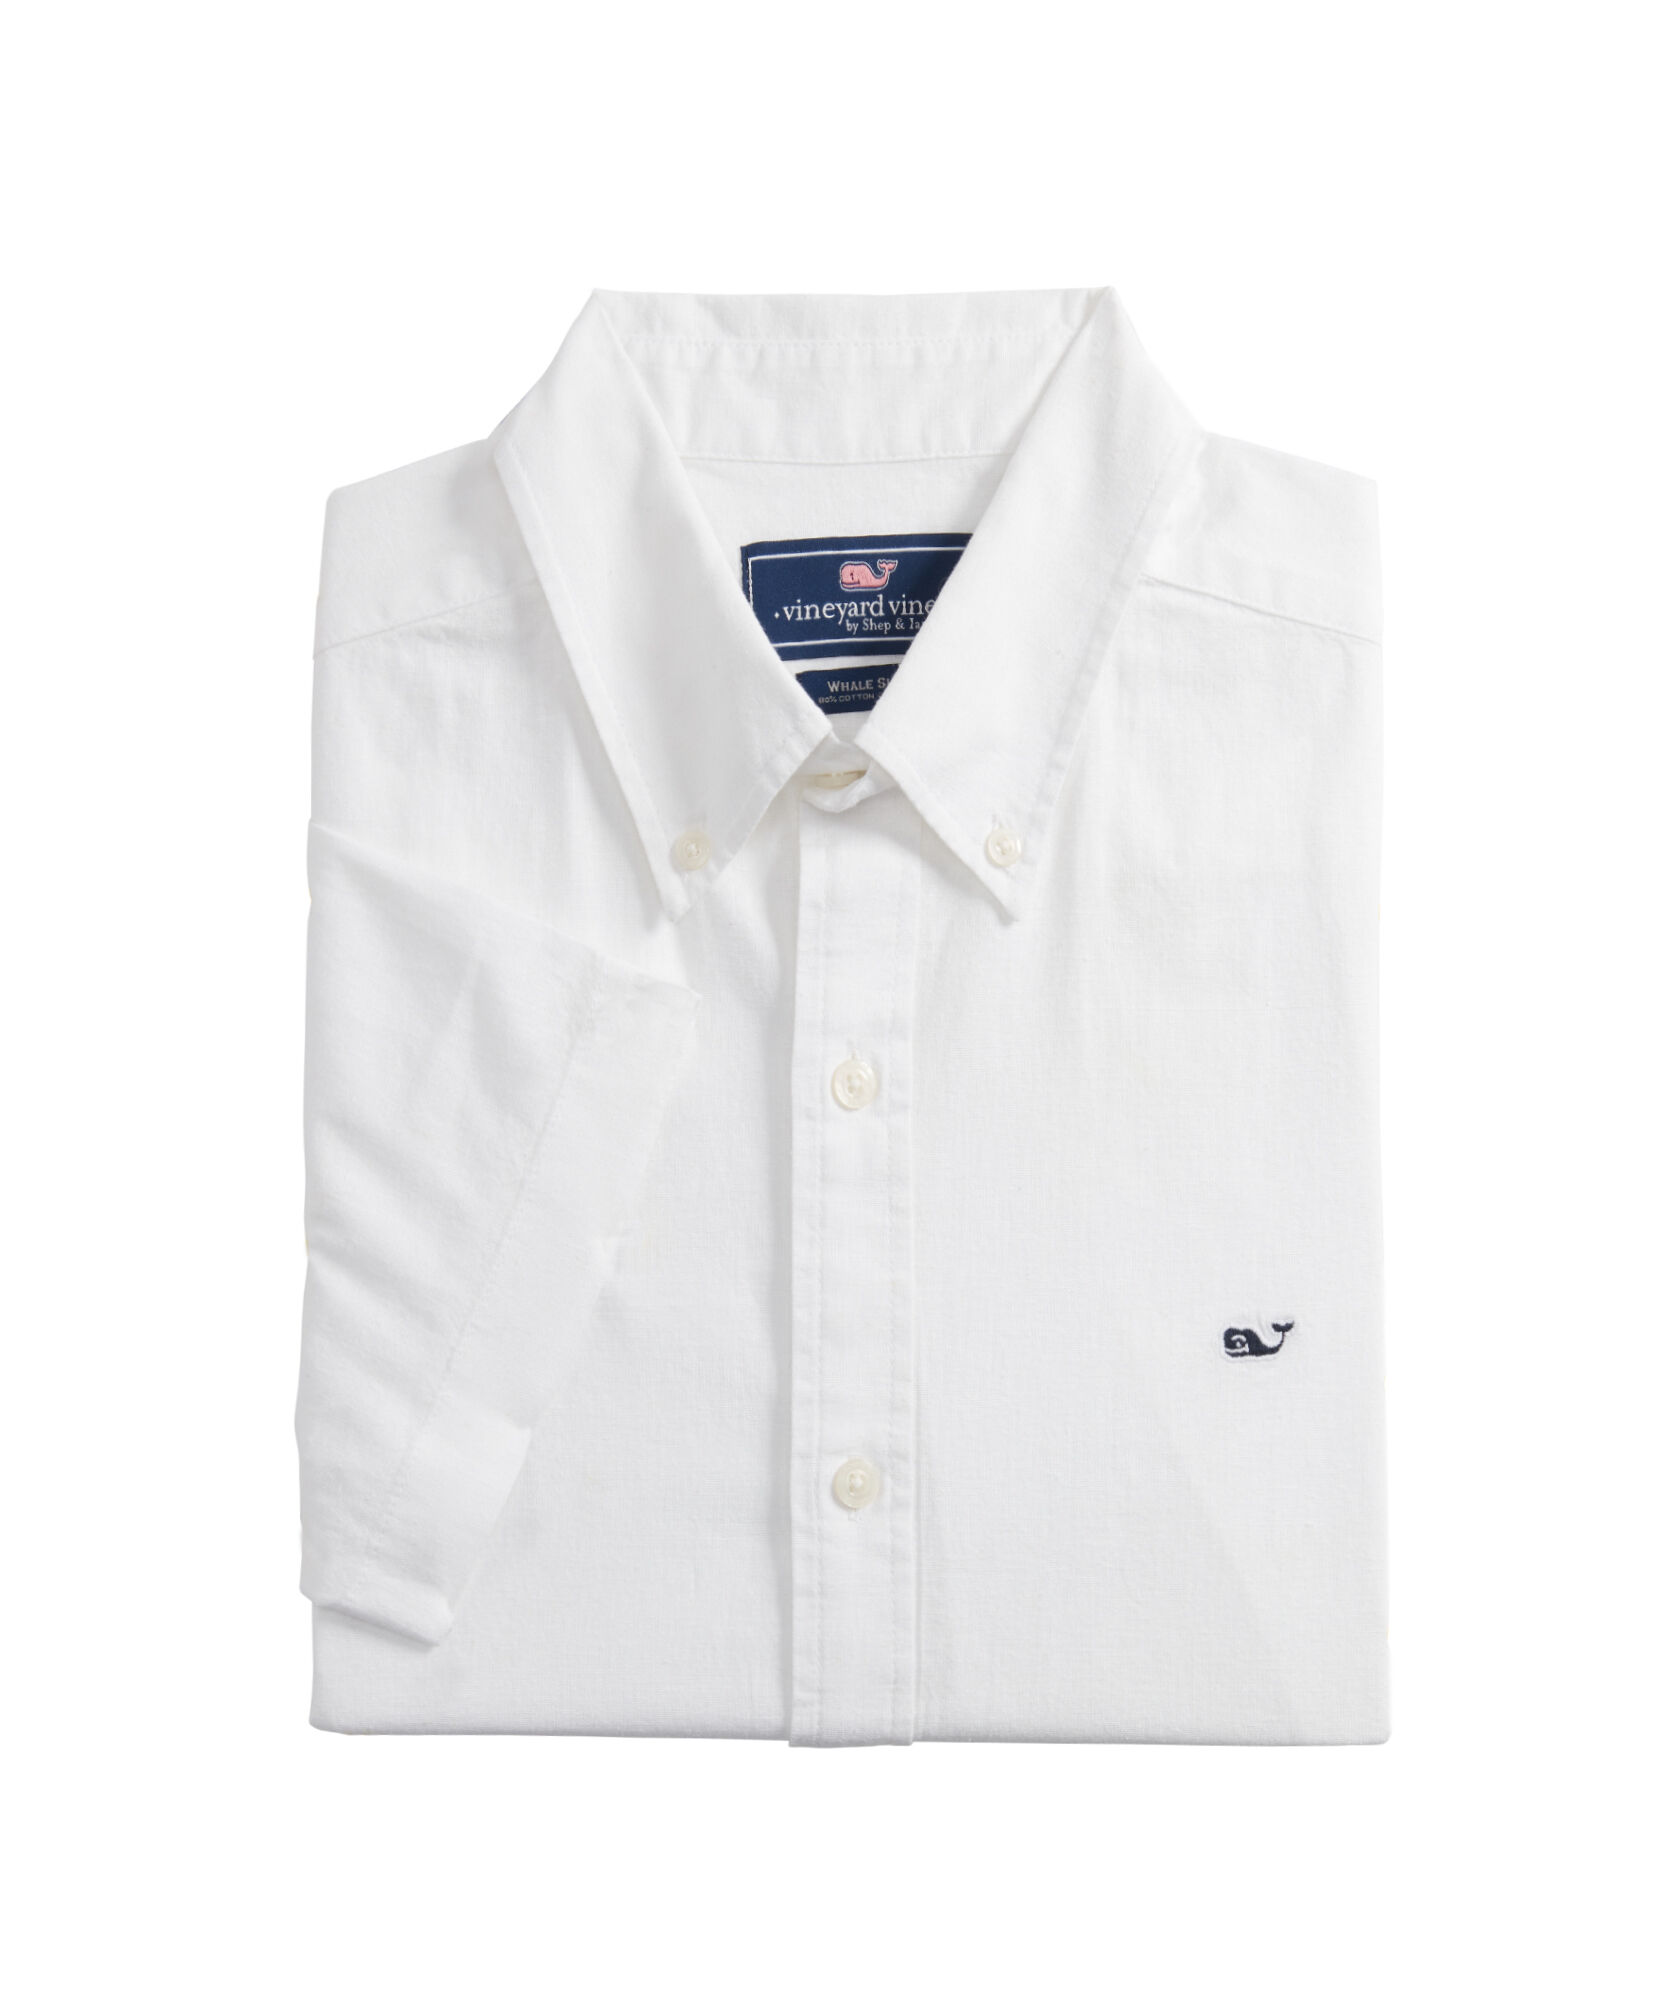 OUTLET Classic Fit Short-Sleeve Whale Shirt